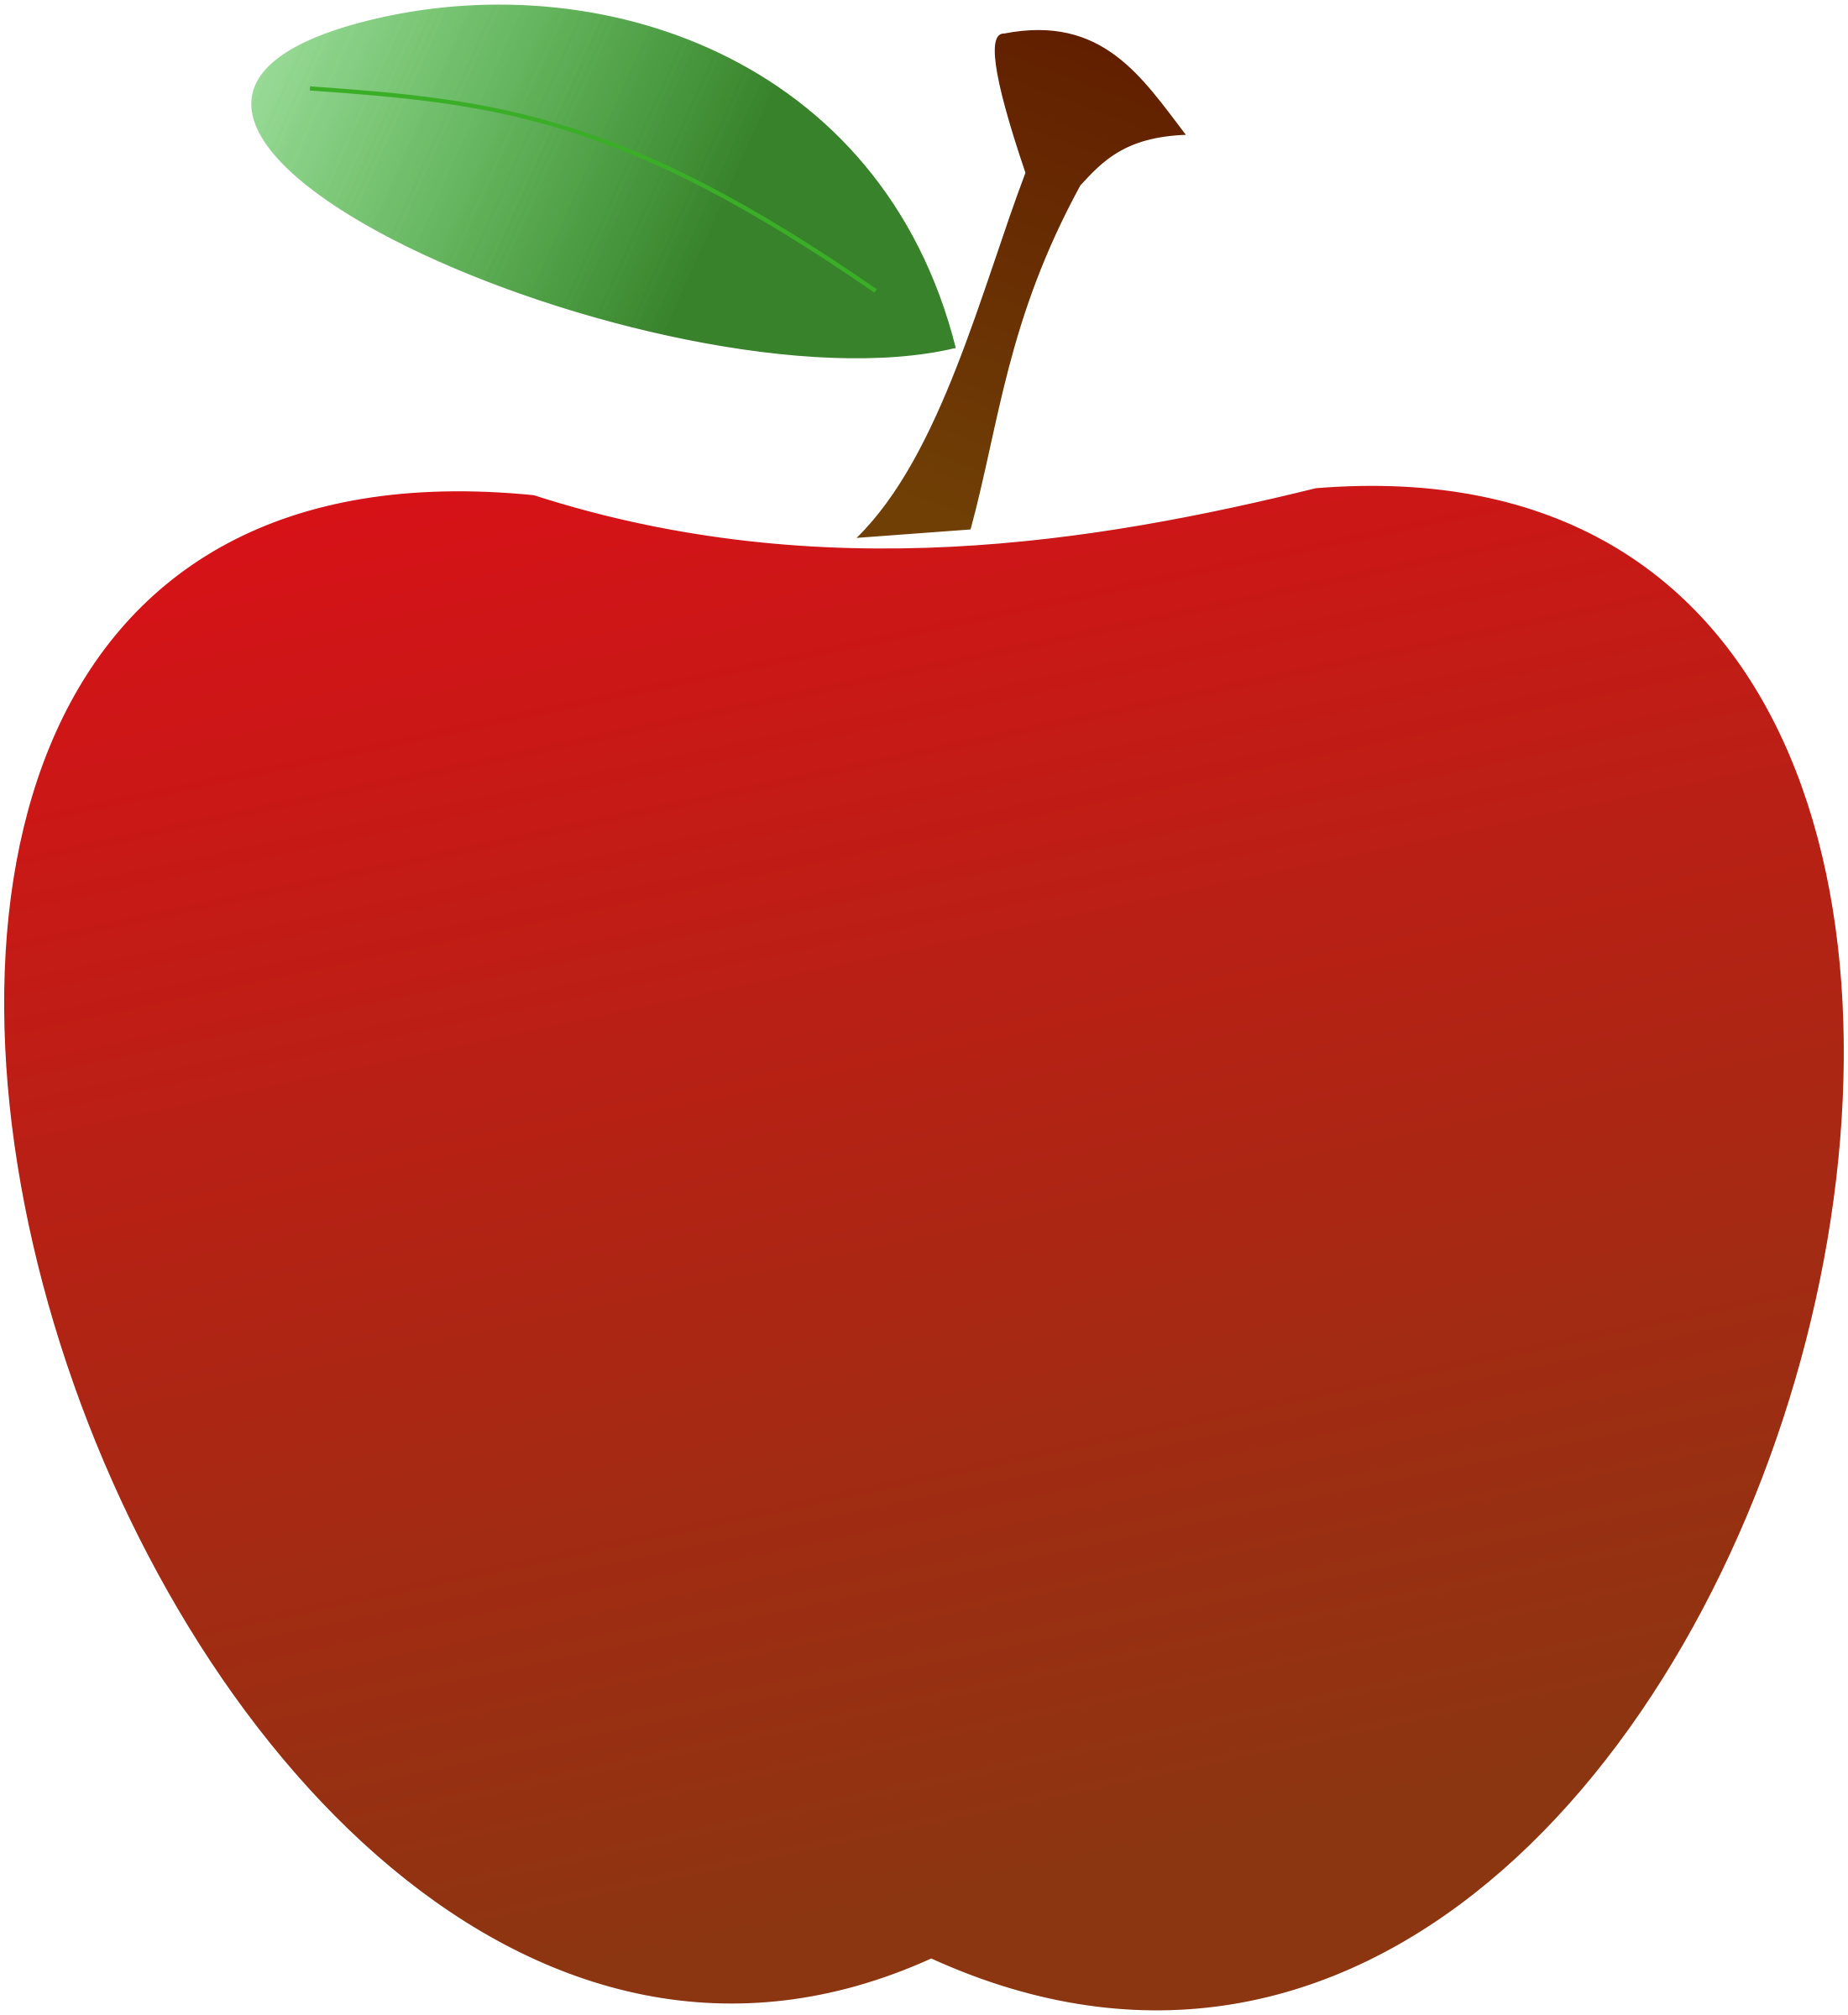 Teacher With Apple PNG - 167834